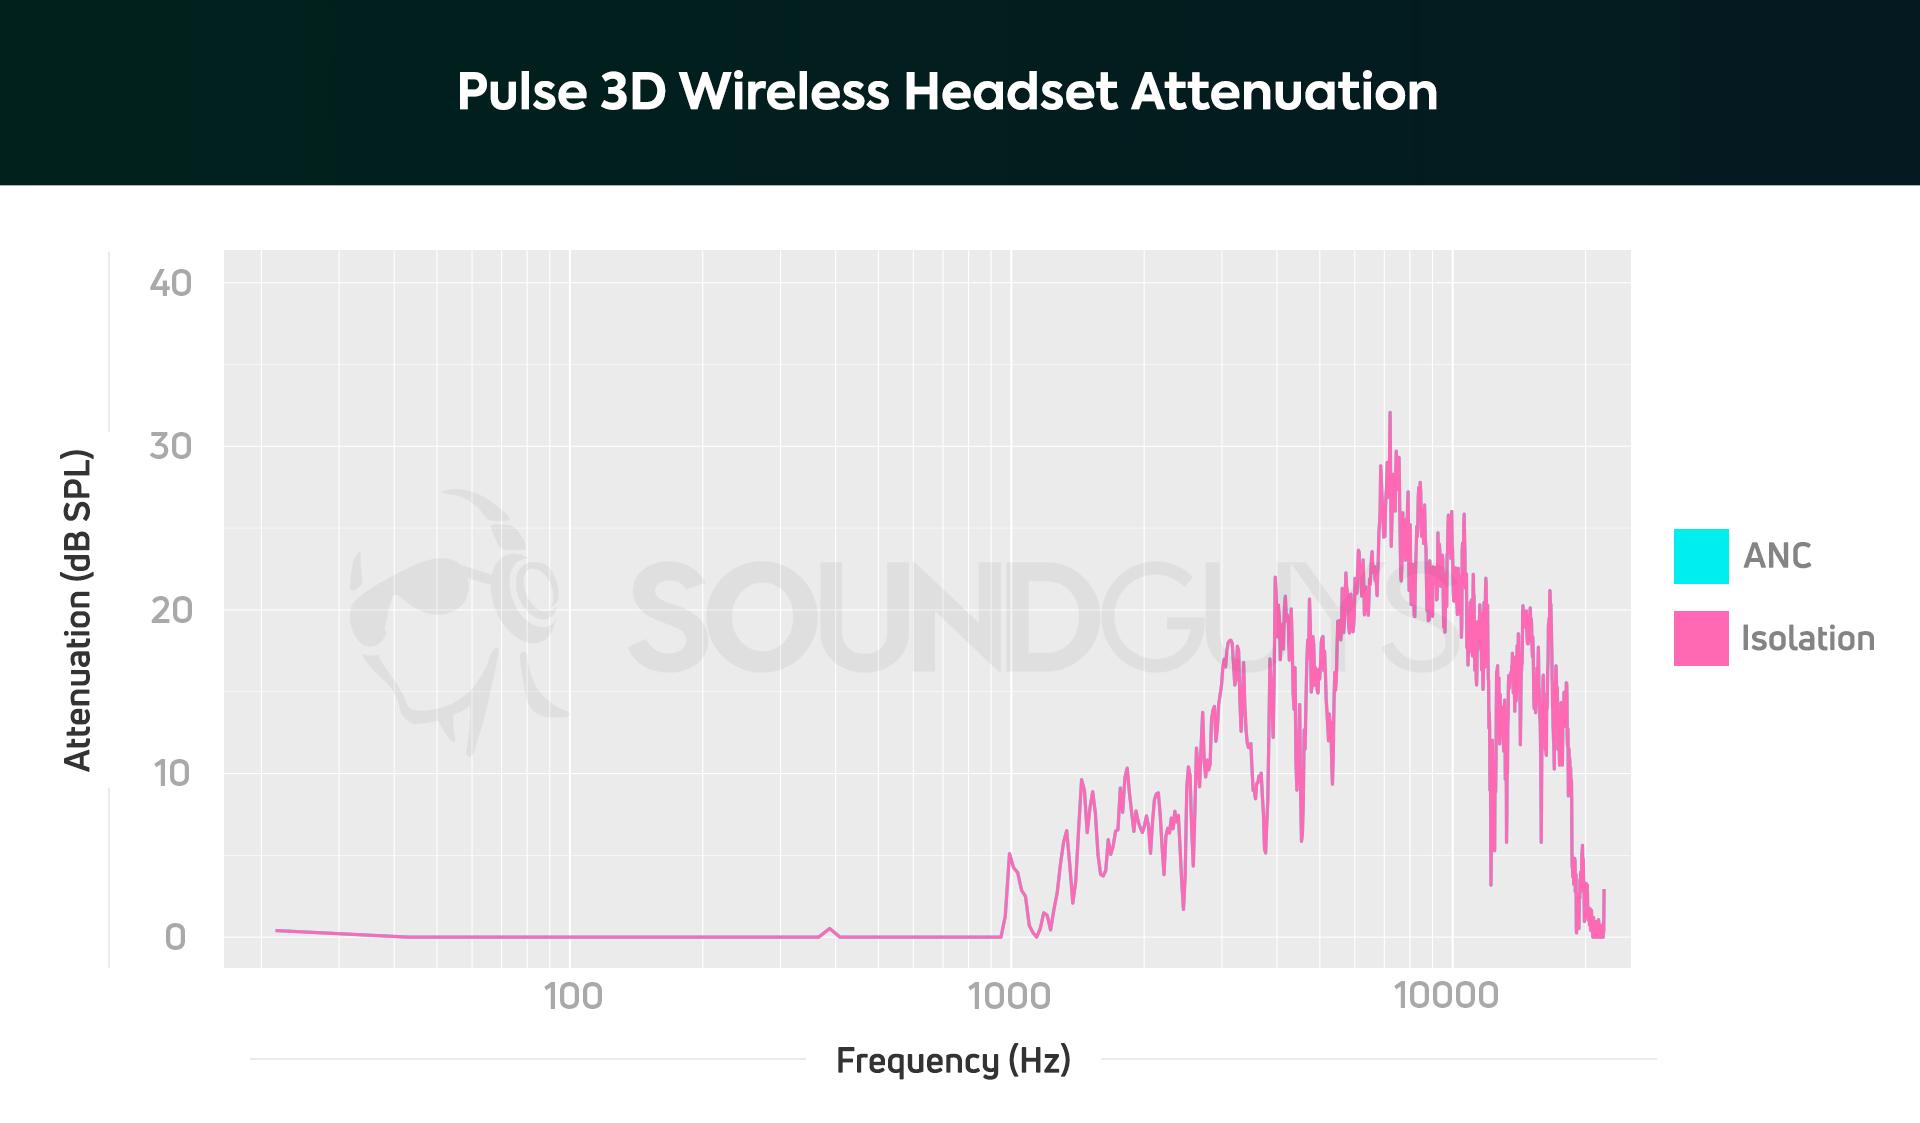 An isolation chart for the Sony Pulse 3D Wireless Headset, which shows very poor attenuation across the board.